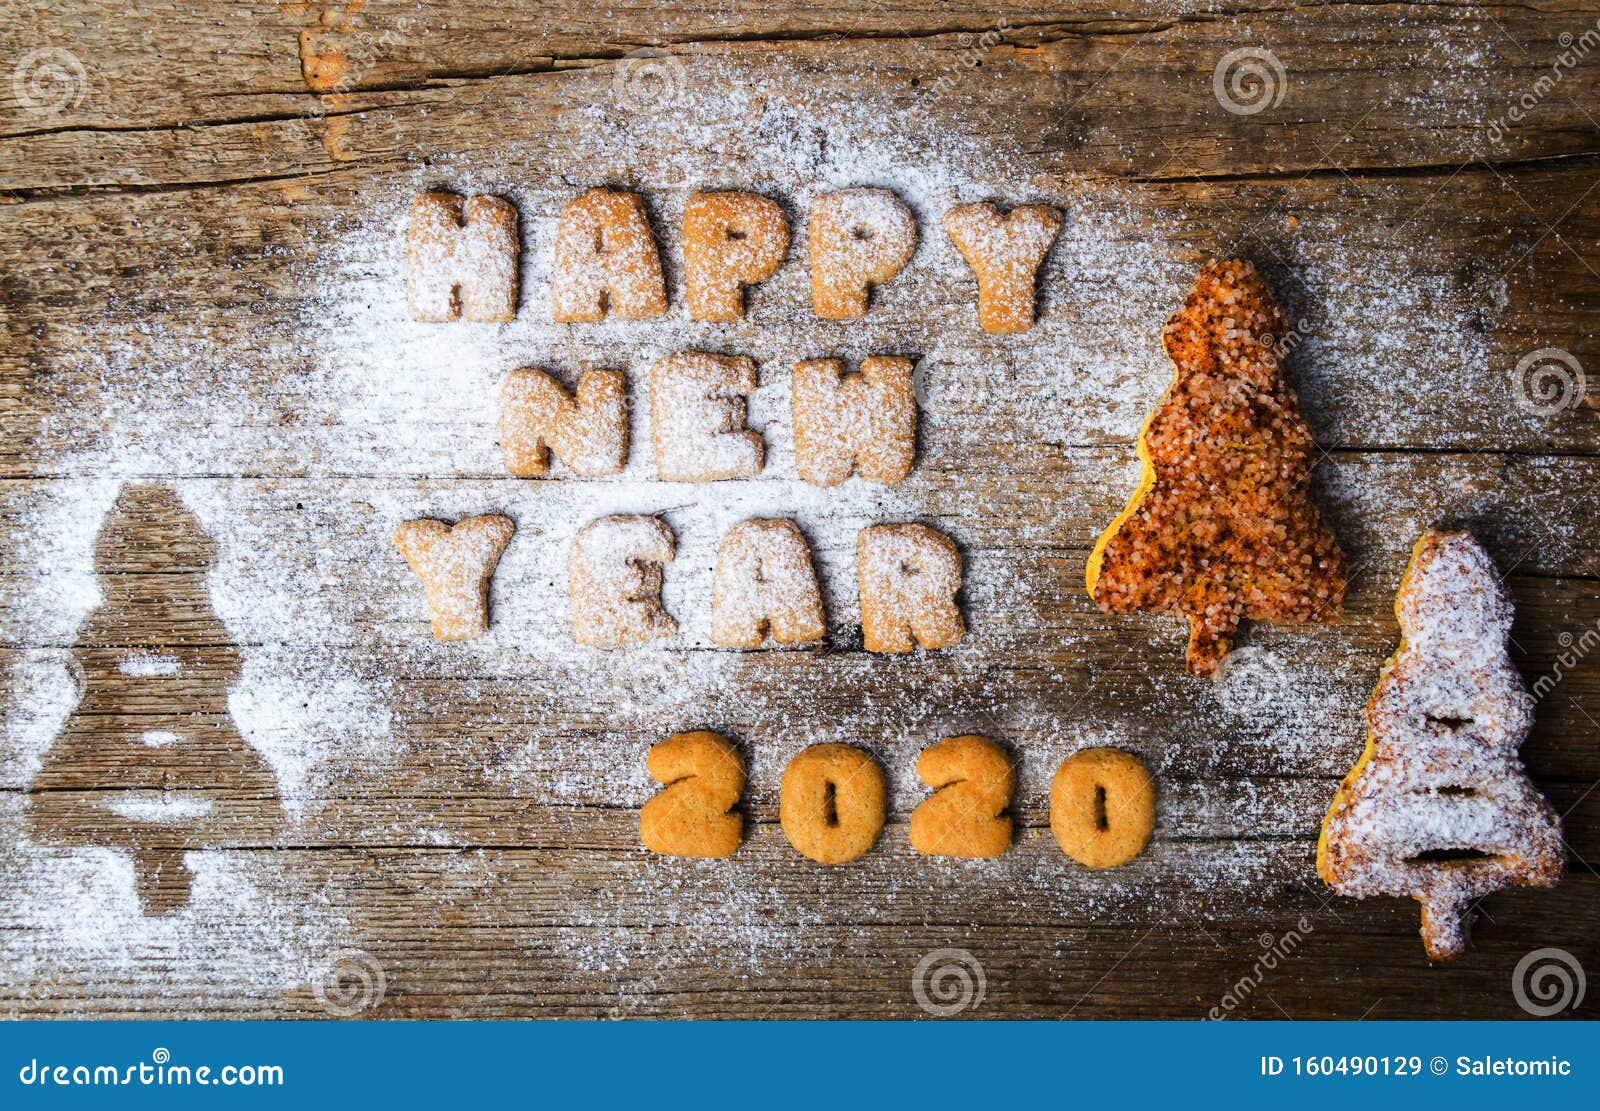 Happy New Year 2020 Written with Cookies Stock Image - Image of ...